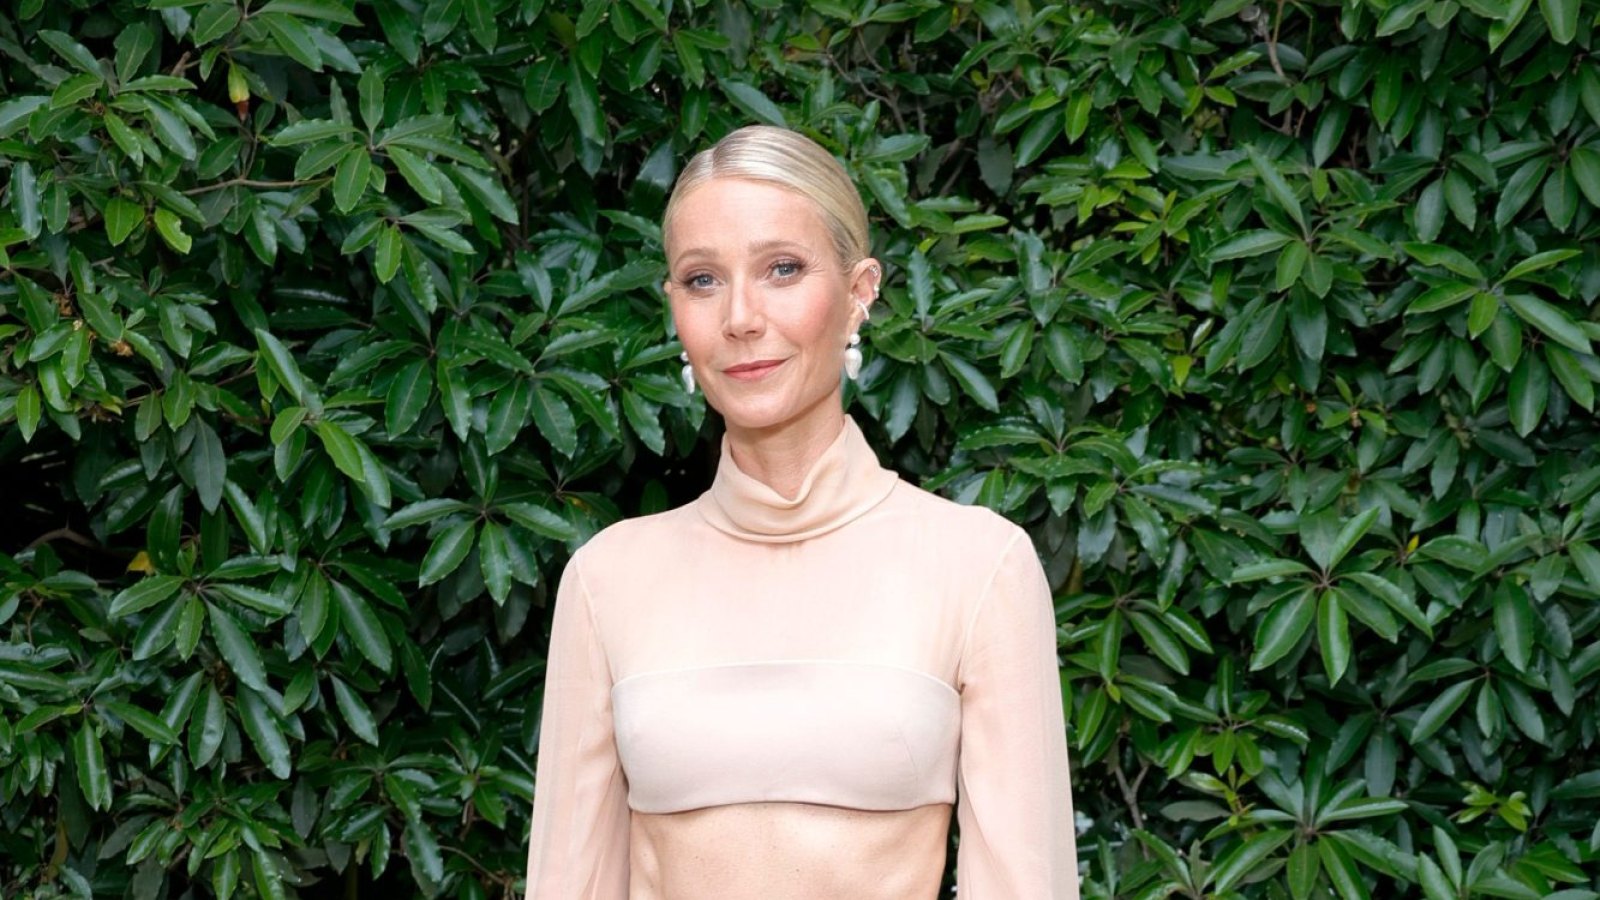 Gwyneth Paltrow just shared her new fave gym wear brand